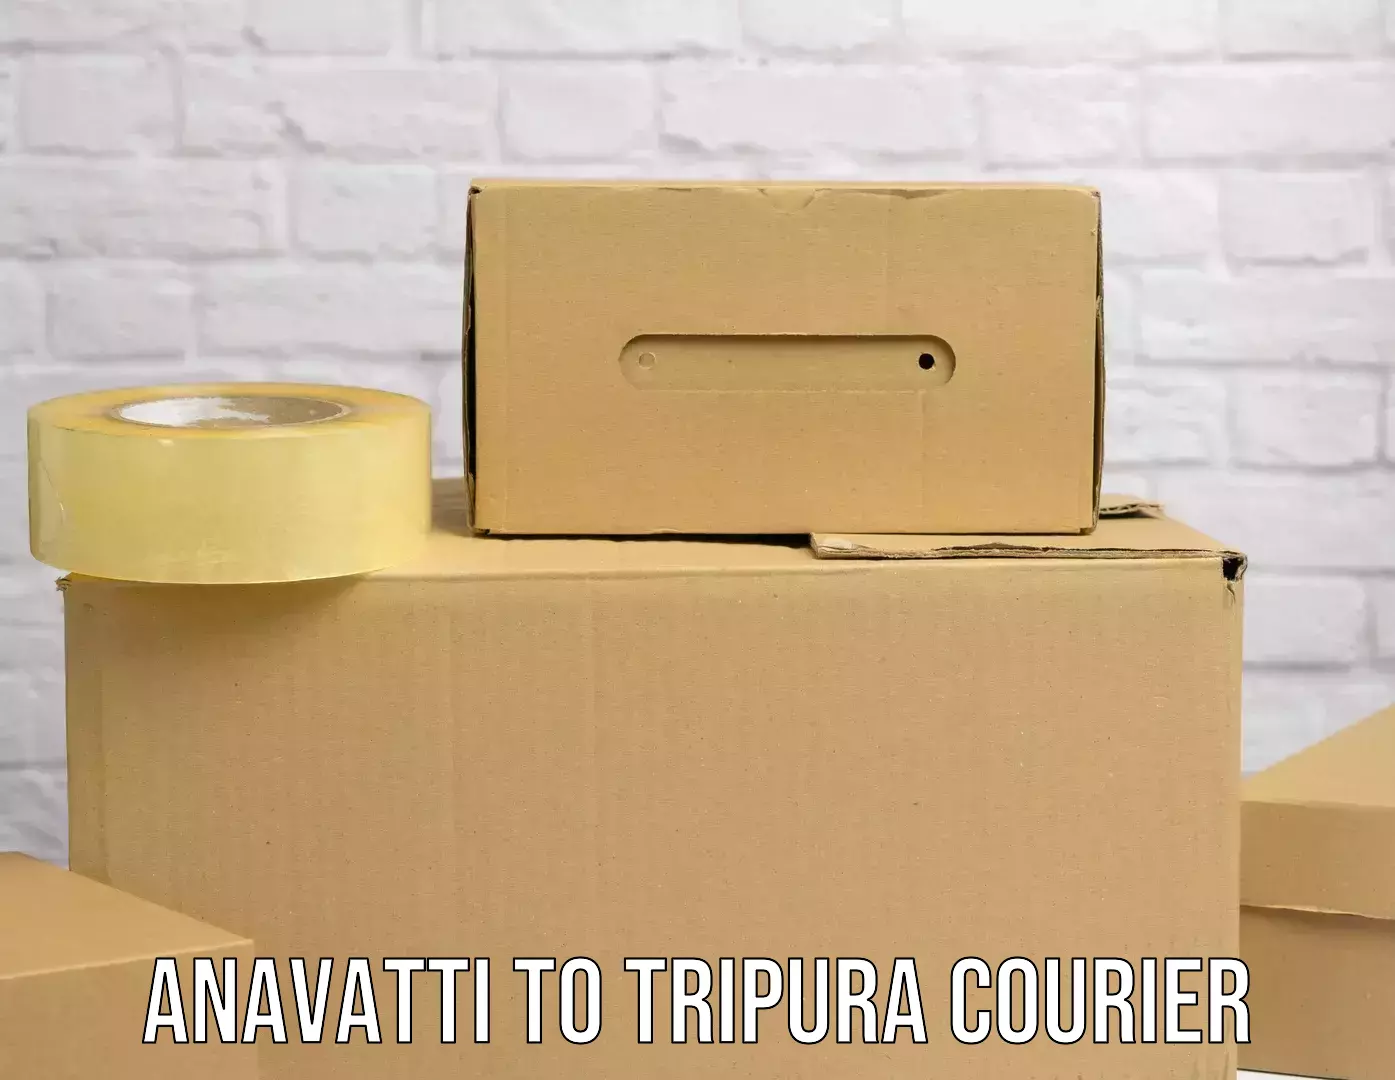 Courier service innovation Anavatti to Dhalai